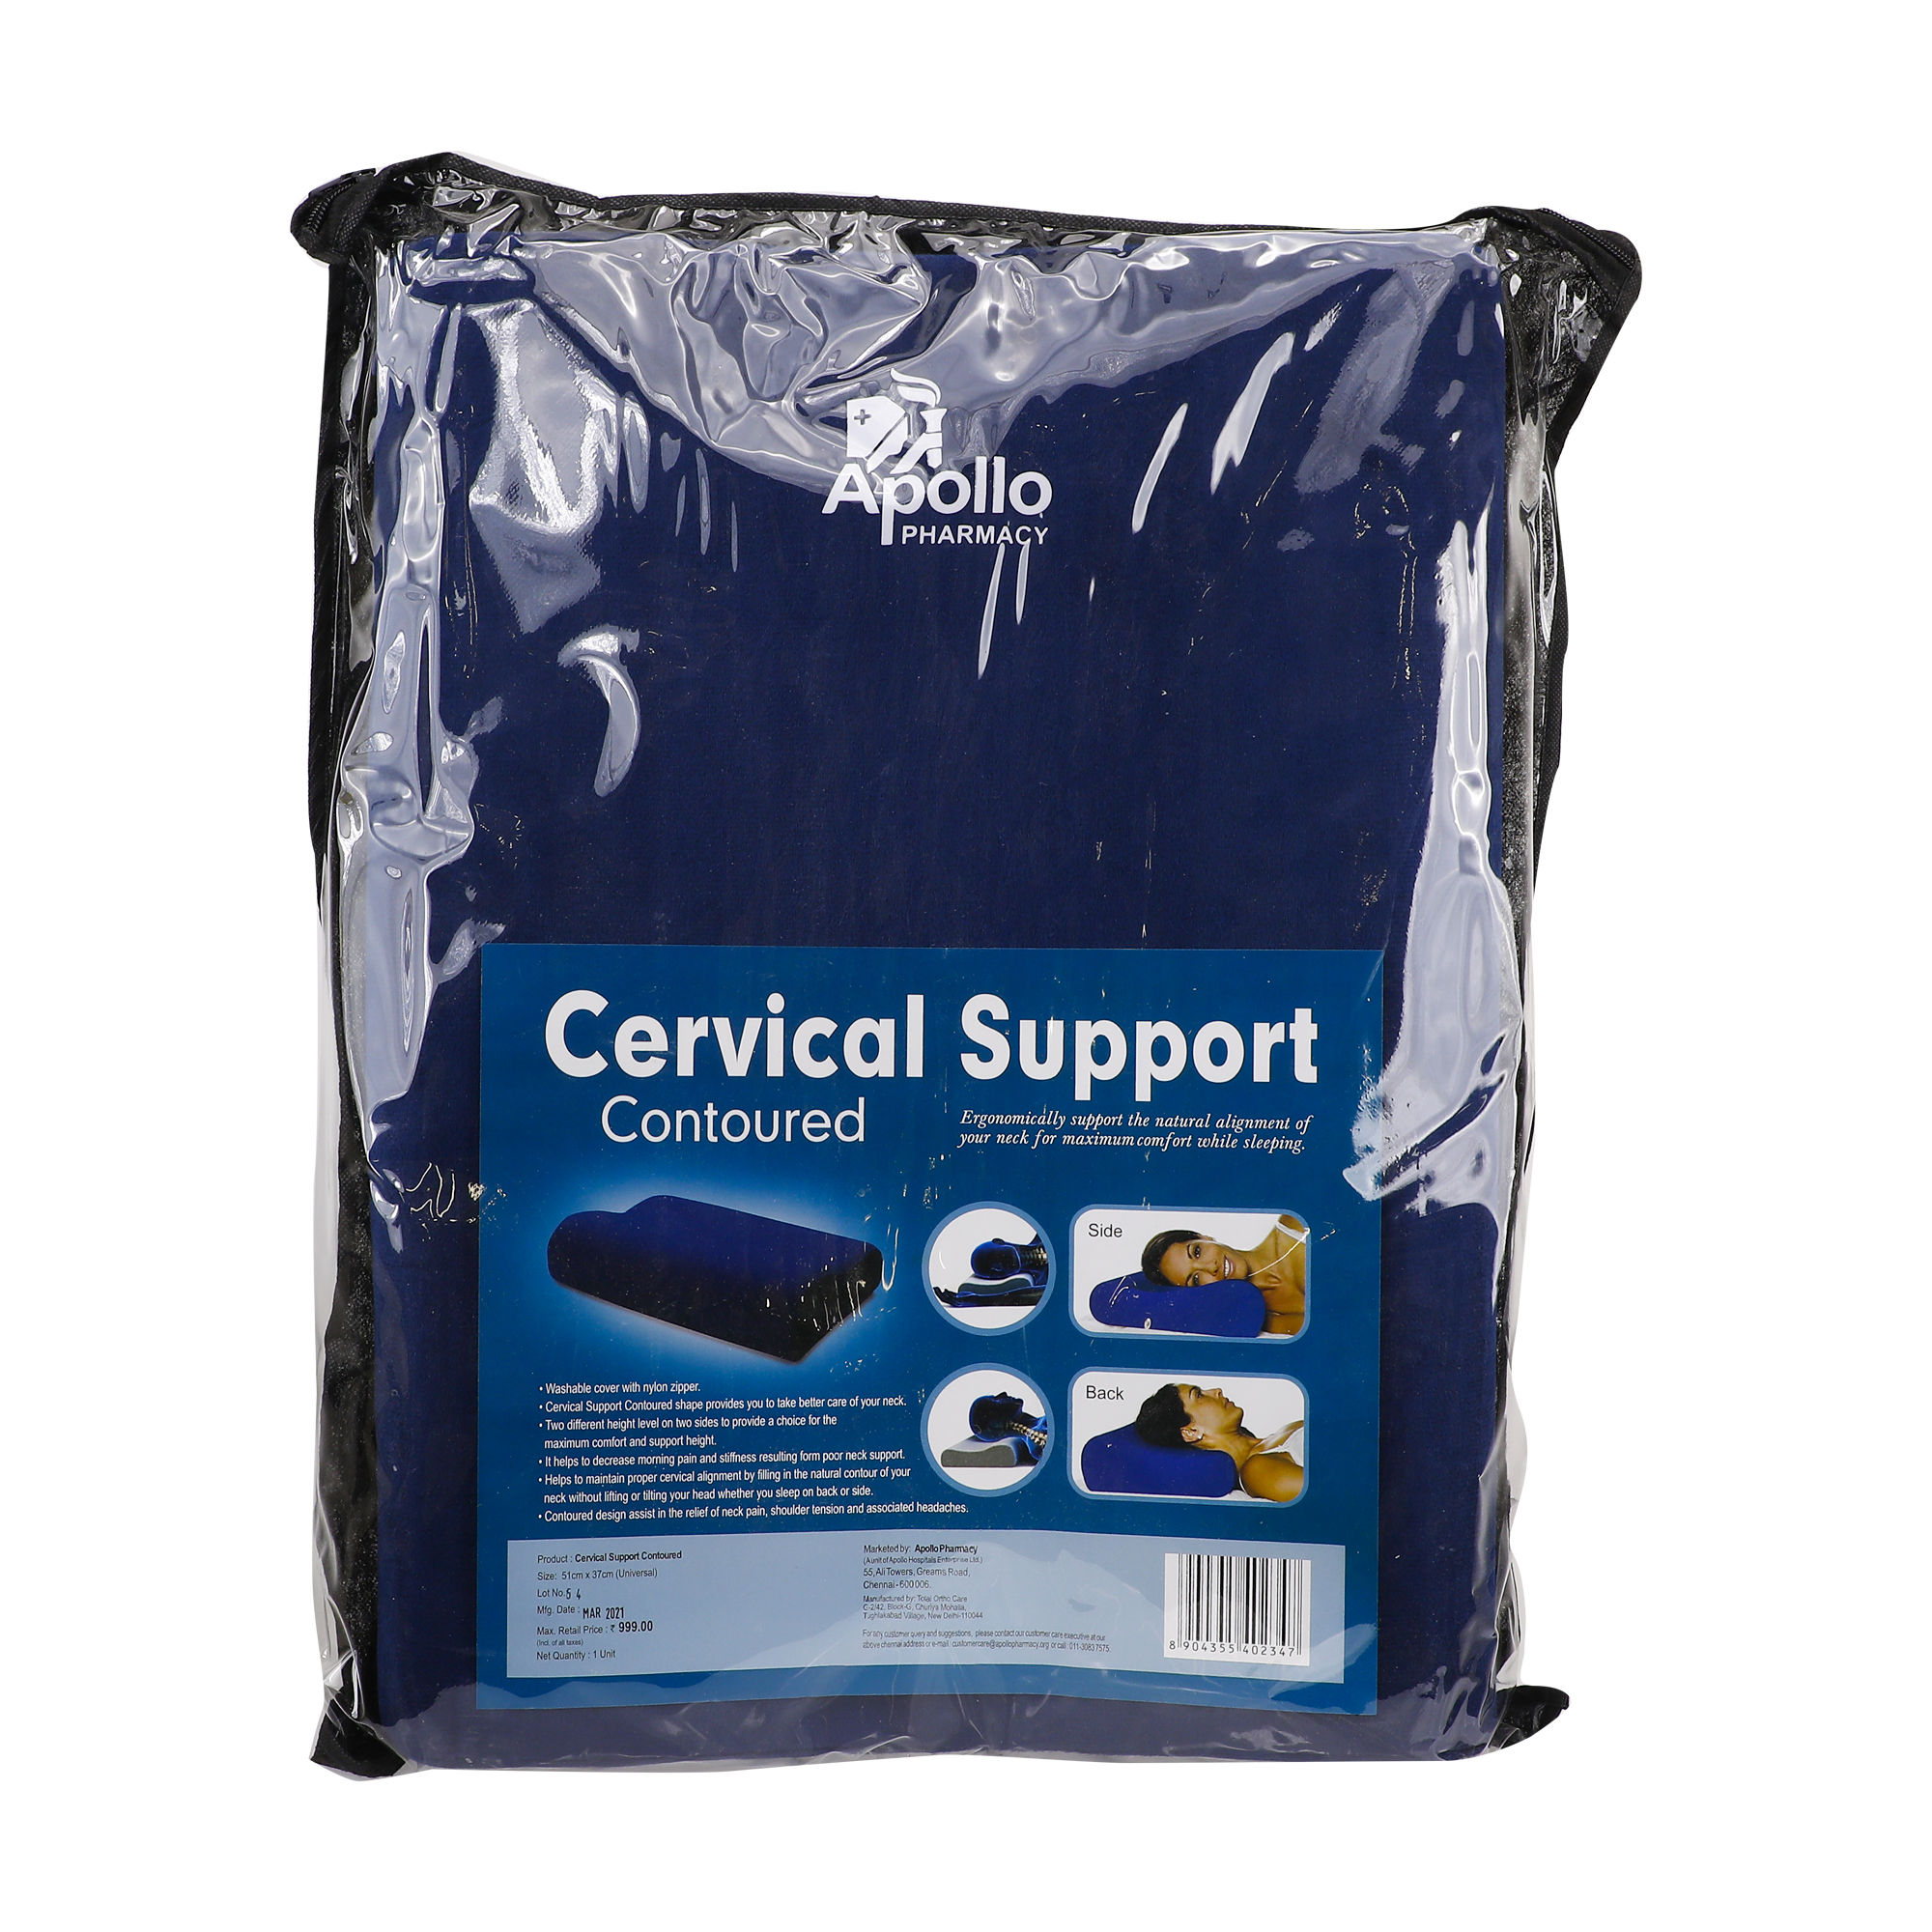 Apollo Pharmacy Cervical Support, 1 Count, Pack of 1 